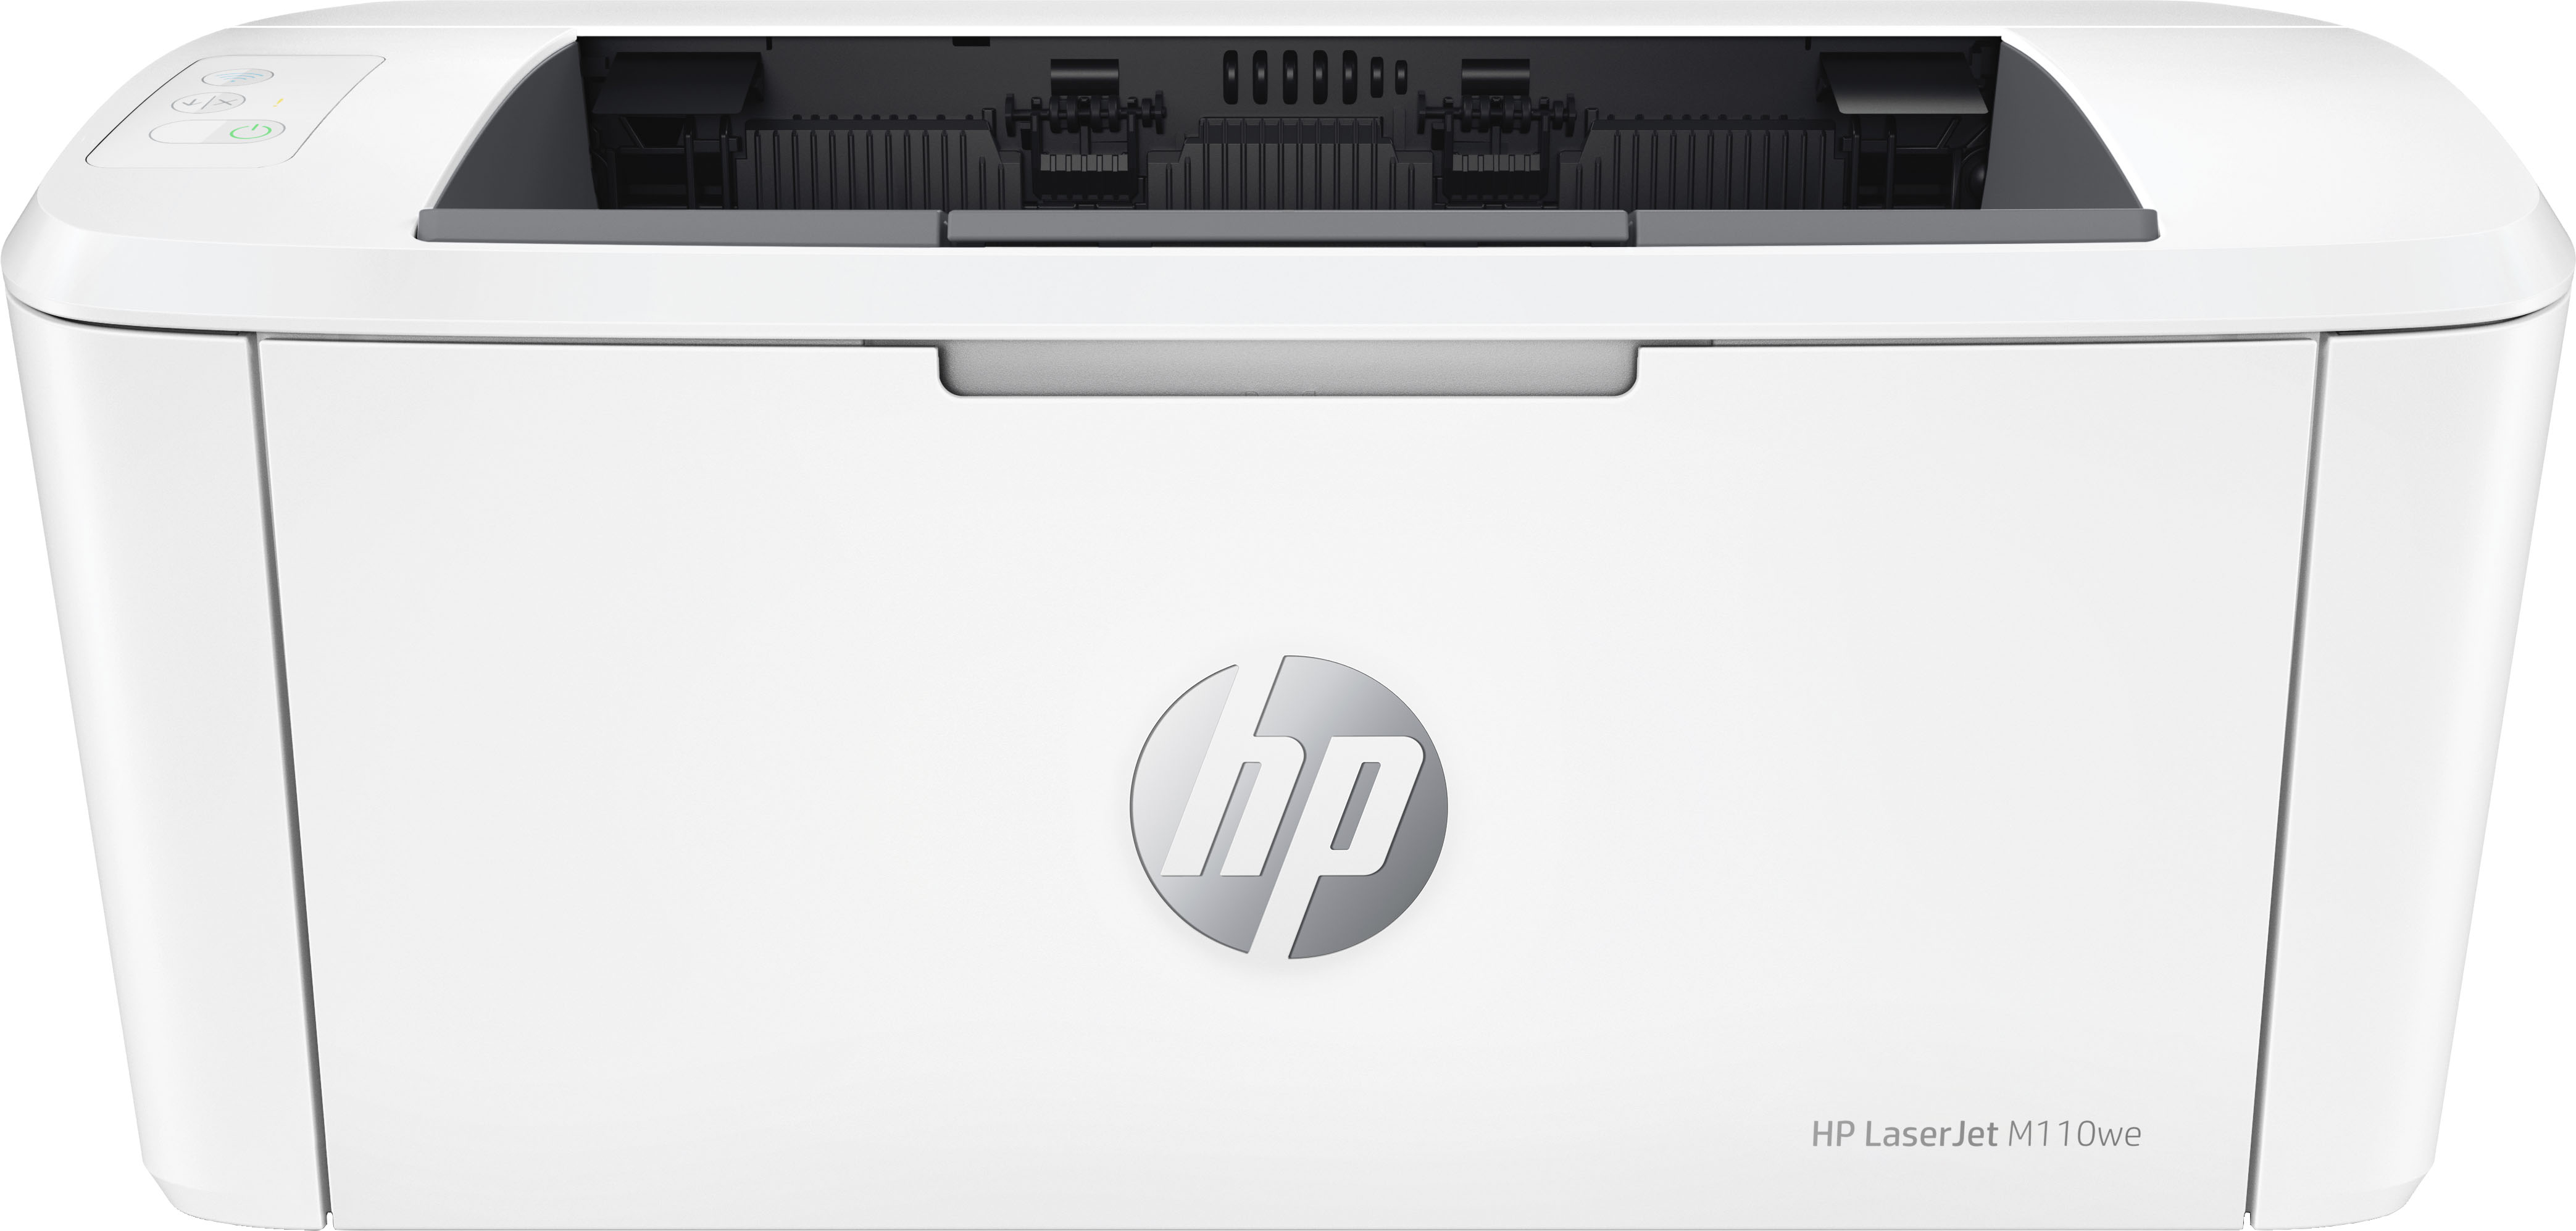 Photo 1 of LaserJet M110we Wireless Black and White Laser Printer with 6 months of Instant Ink included with HP+